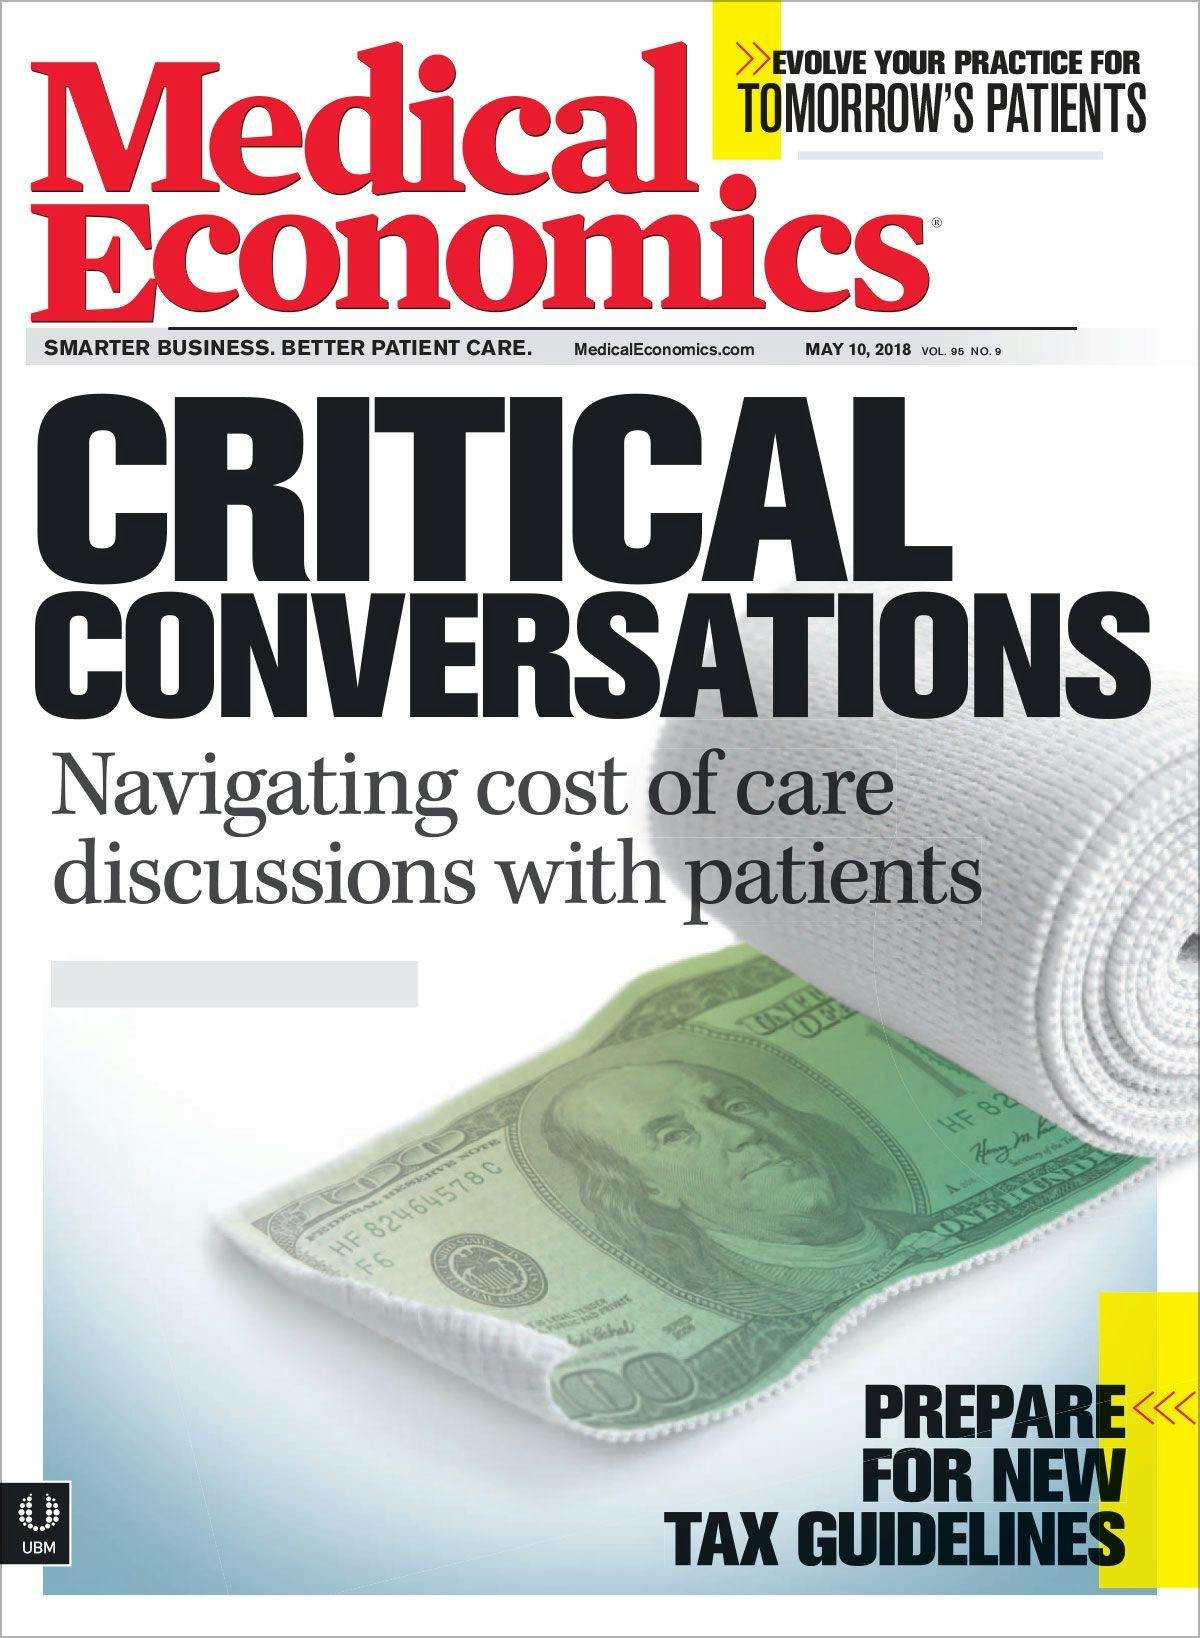 This article appears in the 5/10/18 issue of Medical Economics.